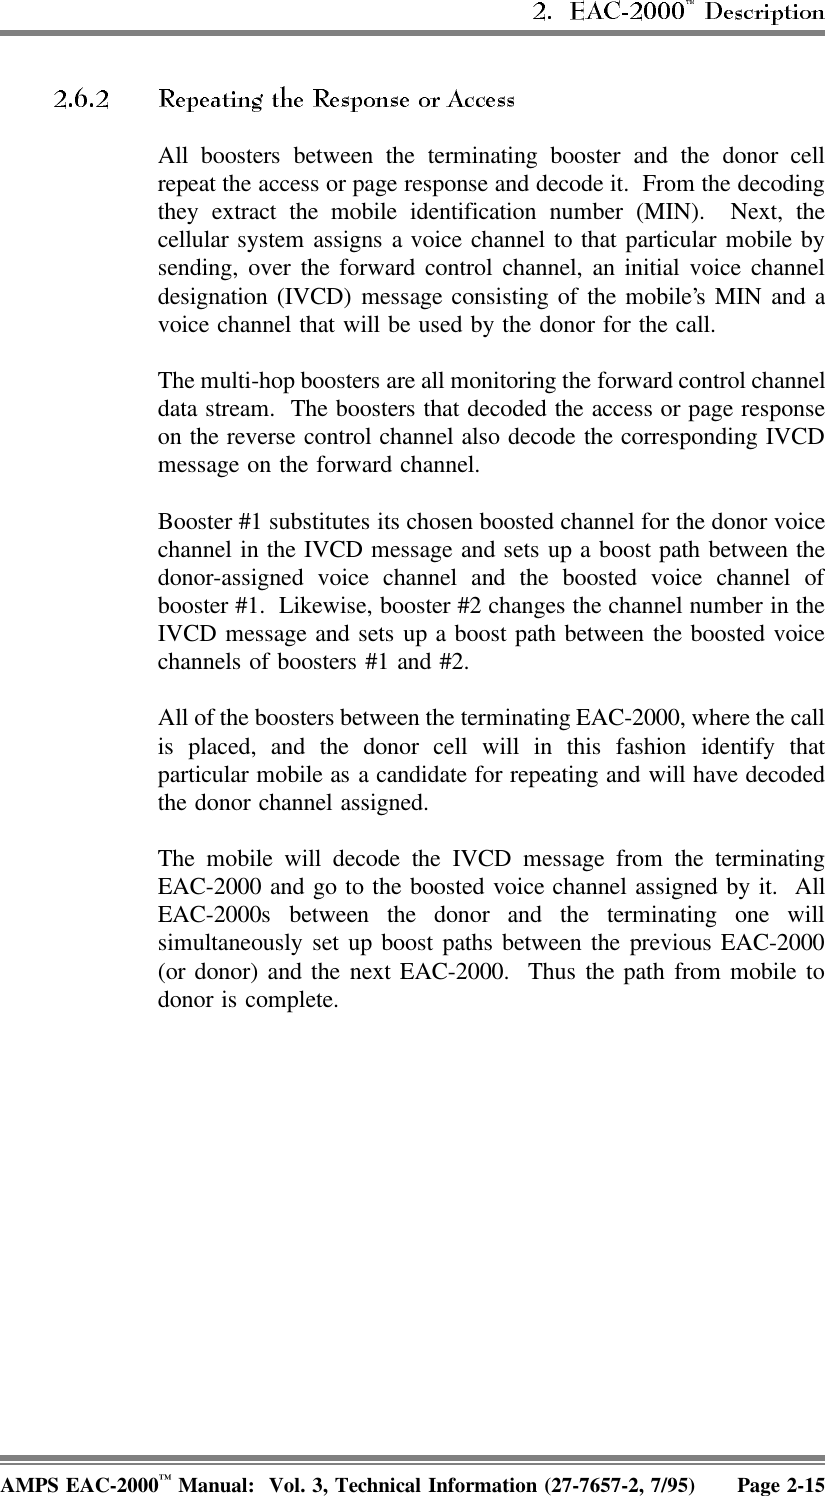  All boosters between the terminating booster and the donor cellrepeat the access or page response and decode it.  From the decodingthey extract the mobile identification number (MIN).  Next, thecellular system assigns a voice channel to that particular mobile bysending, over the forward control channel, an initial voice channeldesignation (IVCD) message consisting of the mobile’s MIN and avoice channel that will be used by the donor for the call.The multi-hop boosters are all monitoring the forward control channeldata stream.  The boosters that decoded the access or page responseon the reverse control channel also decode the corresponding IVCDmessage on the forward channel.Booster #1 substitutes its chosen boosted channel for the donor voicechannel in the IVCD message and sets up a boost path between thedonor-assigned voice channel and the boosted voice channel ofbooster #1.  Likewise, booster #2 changes the channel number in theIVCD message and sets up a boost path between the boosted voicechannels of boosters #1 and #2.All of the boosters between the terminating EAC-2000, where the callis placed, and the donor cell will in this fashion identify thatparticular mobile as a candidate for repeating and will have decodedthe donor channel assigned.The mobile will decode the IVCD message from the terminatingEAC-2000 and go to the boosted voice channel assigned by it.  AllEAC-2000s between the donor and the terminating one willsimultaneously set up boost paths between the previous EAC-2000(or donor) and the next EAC-2000.  Thus the path from mobile todonor is complete.AMPS EAC-2000™ Manual:  Vol. 3, Technical Information (27-7657-2, 7/95) Page 2-15